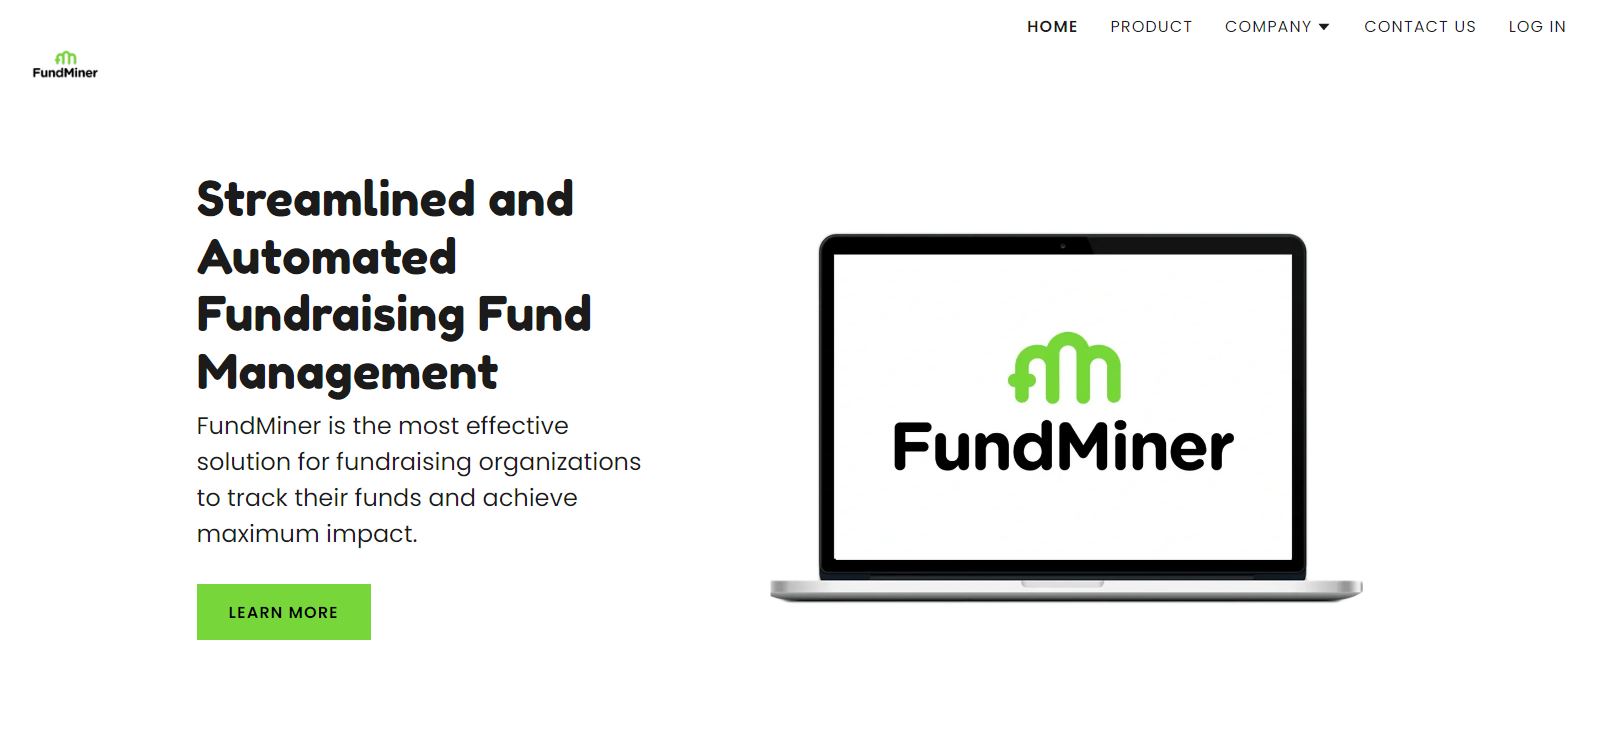 FundMiner Secures $1.7 Million in Funding to Revolutionize Fund Management and Gift Administration